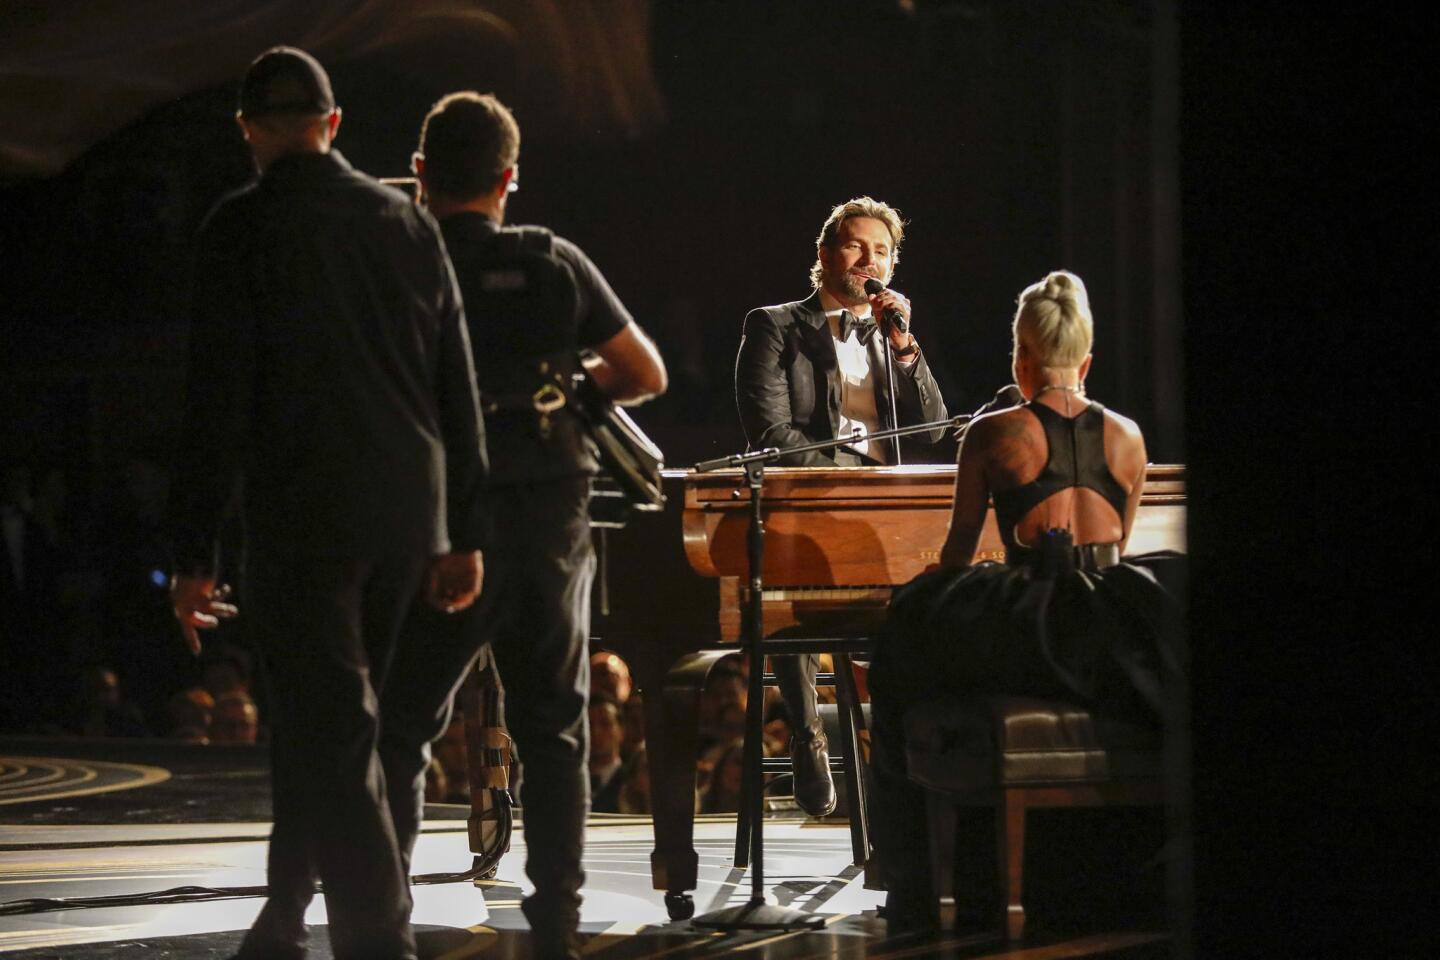 A view from backstage of Bradley Cooper and Lady Gaga performing "Shallow" at the 91st Academy Awards on Sunday.